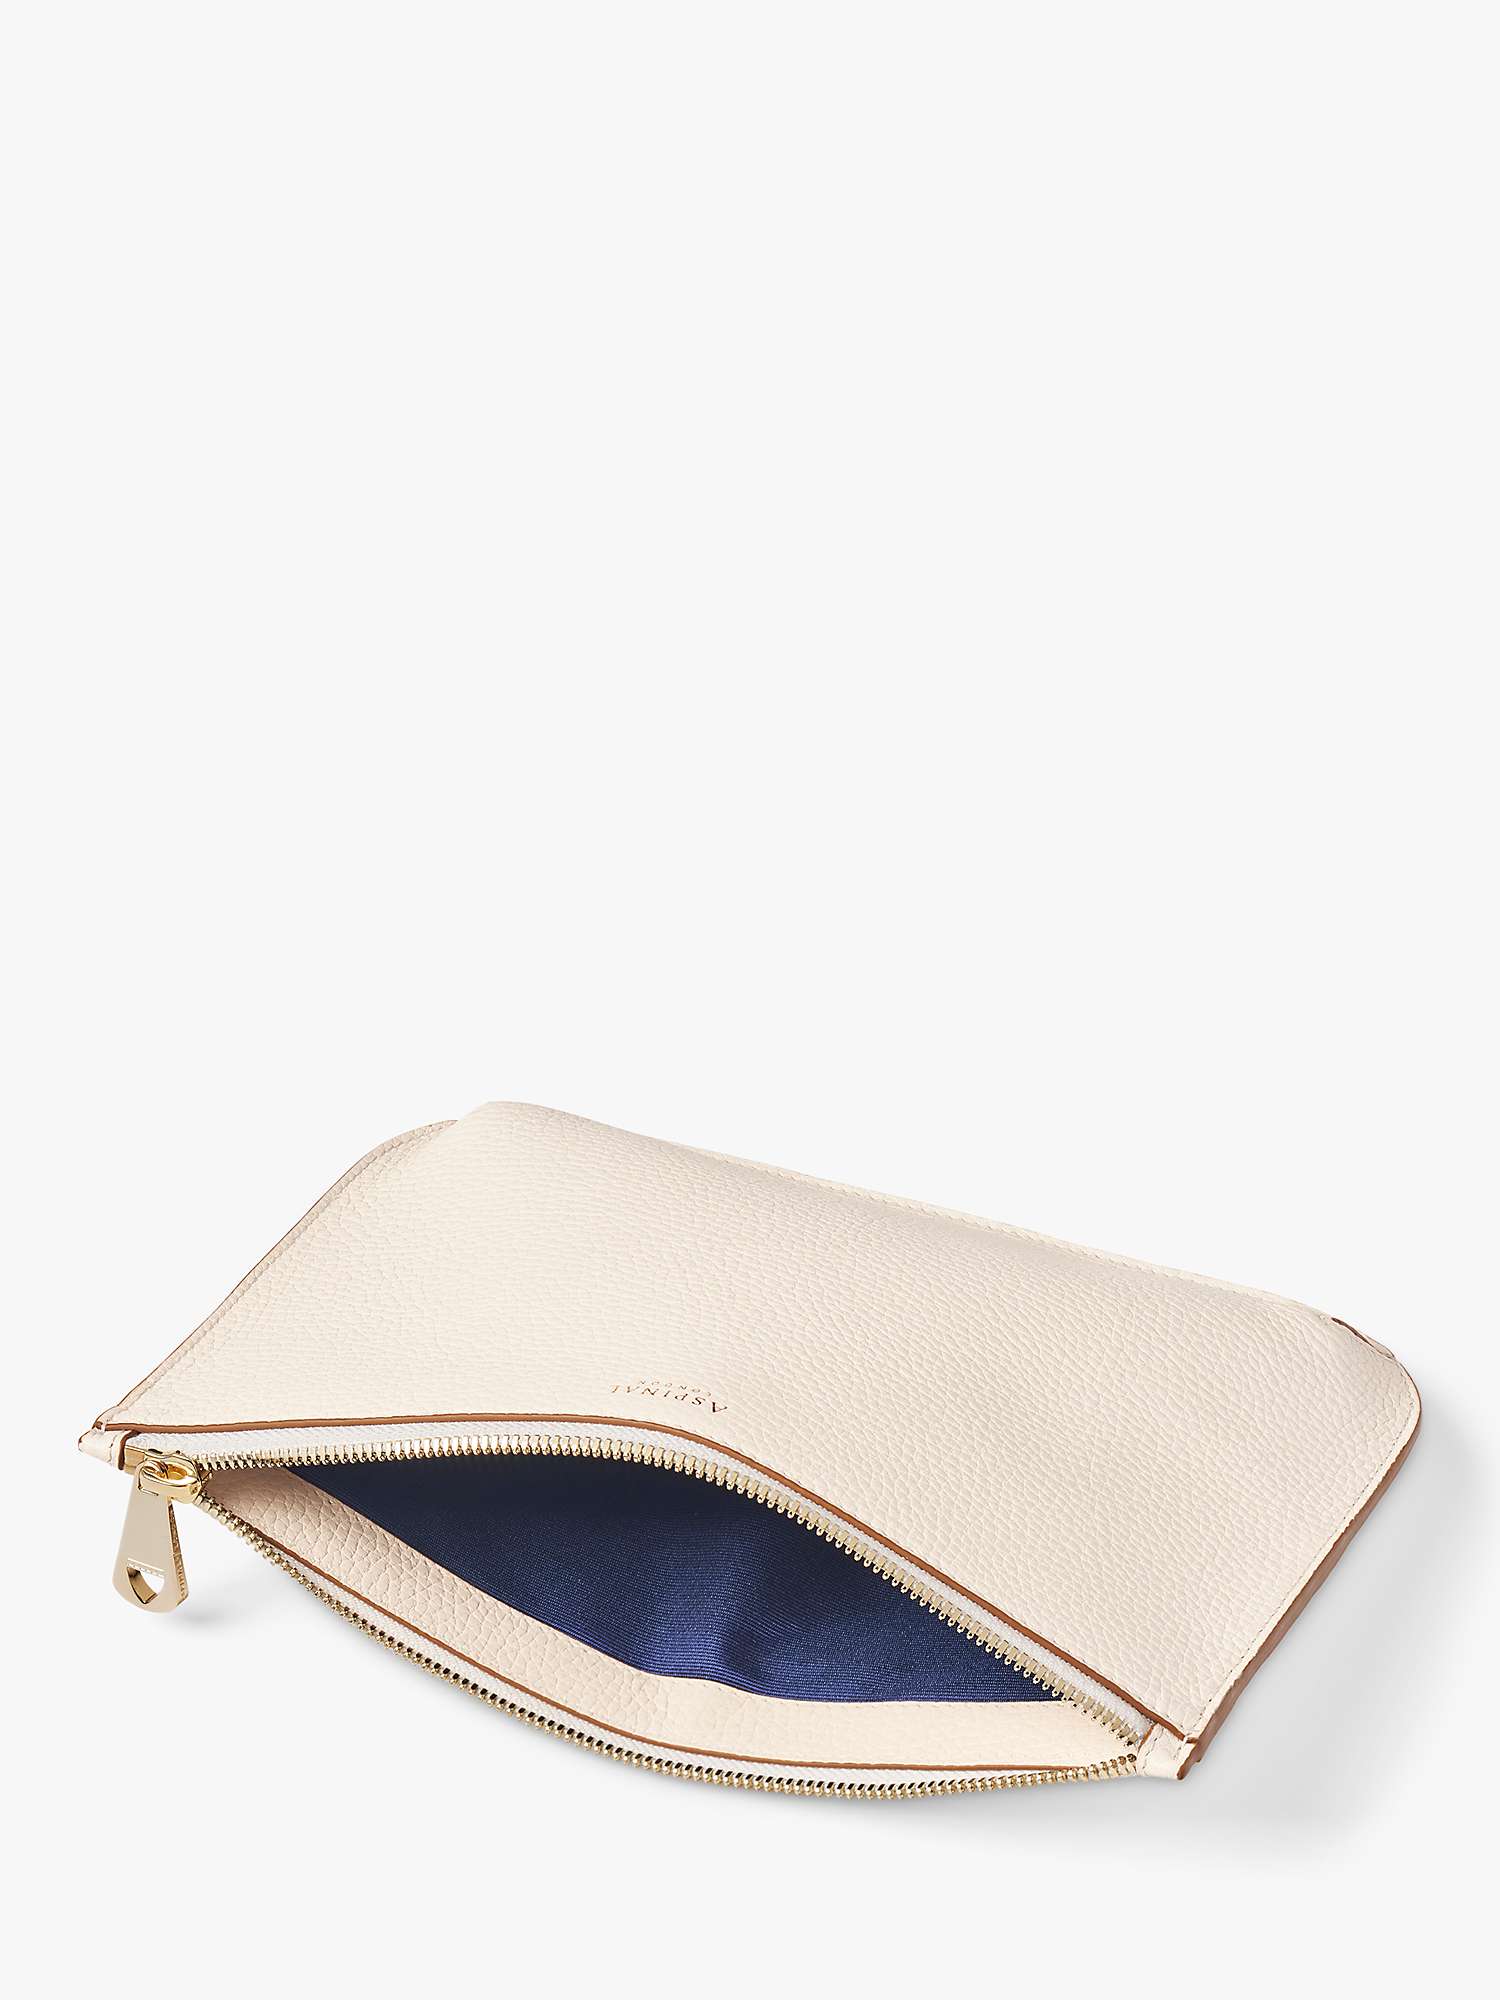 Buy Aspinal of London Large Ella Pebble Grain Leather Pouch Online at johnlewis.com